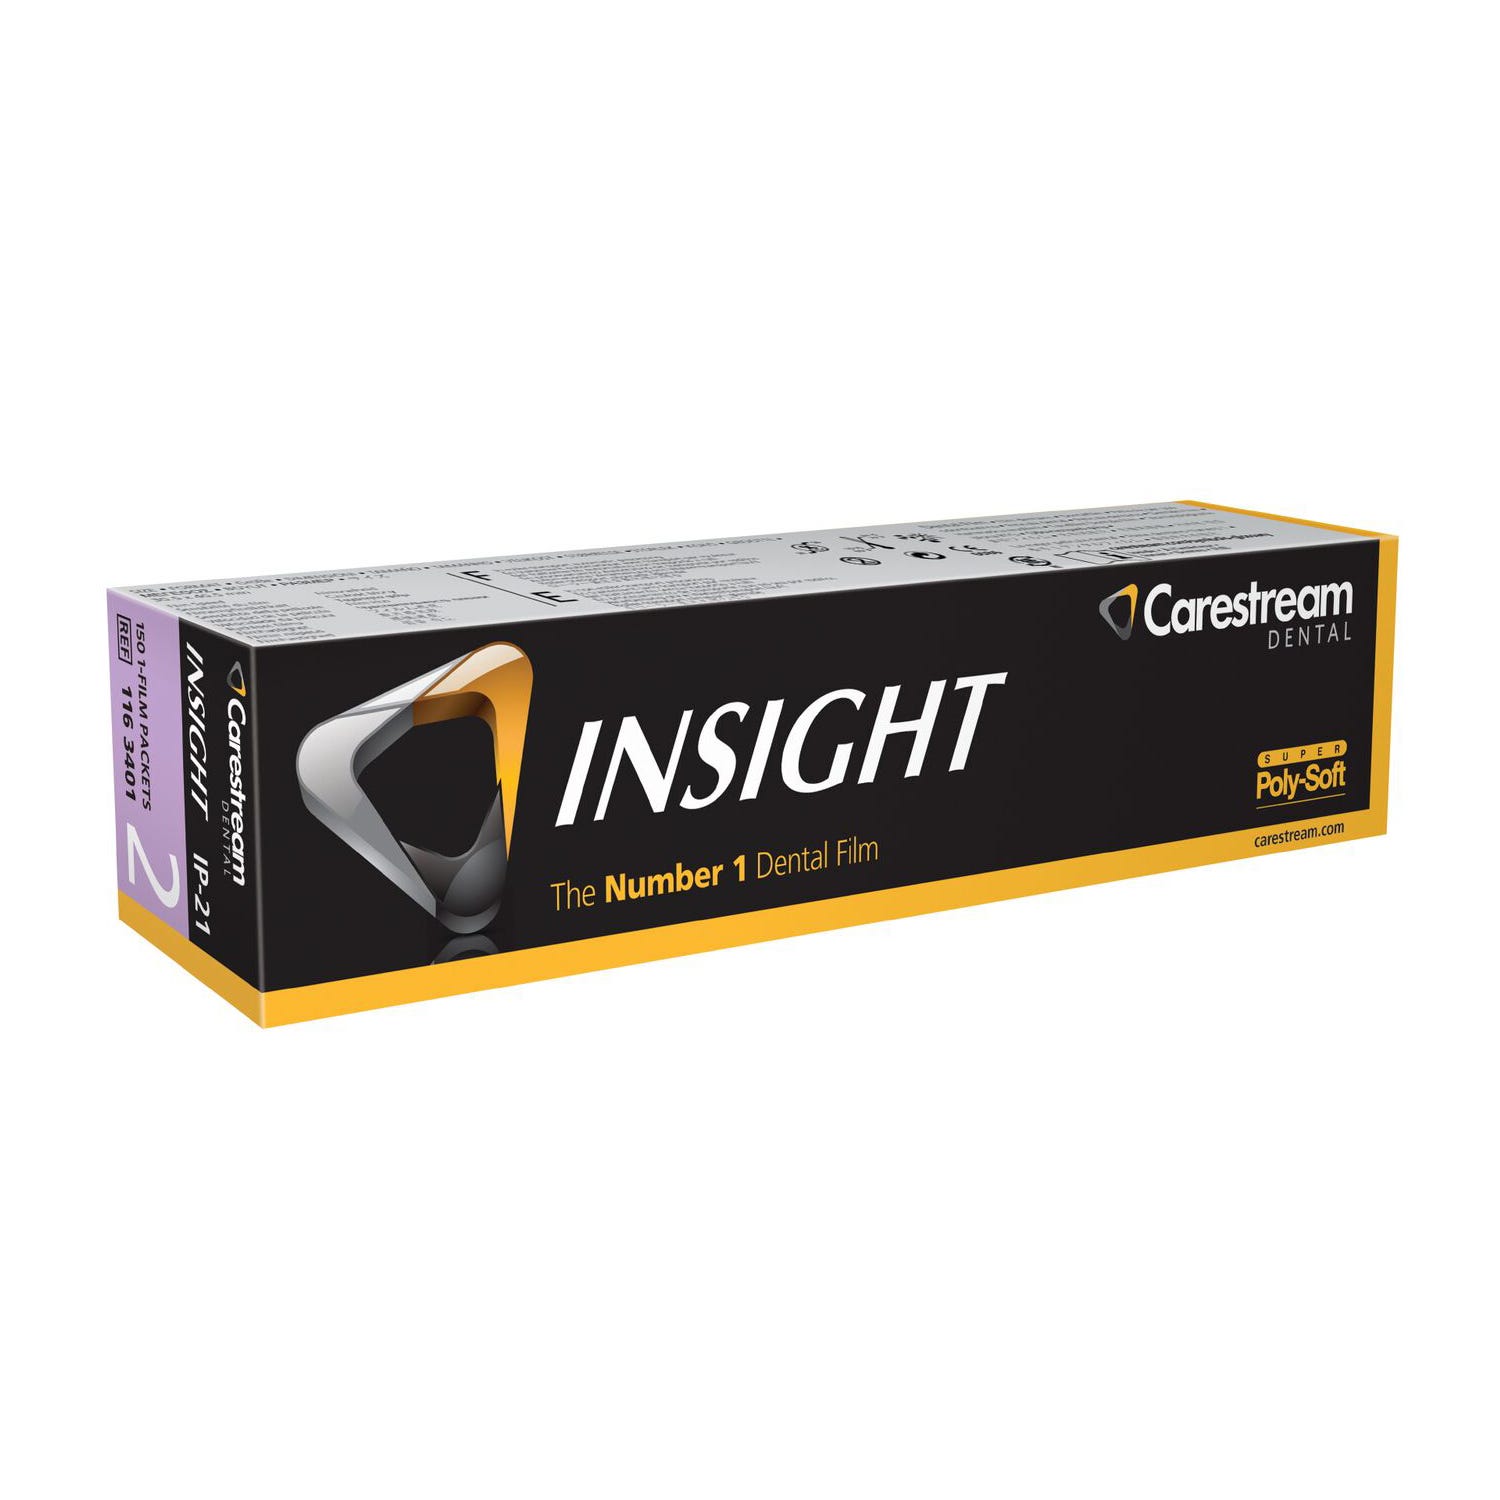 INSIGHT Dental Film, Size 2, IP-21, Super Poly-Soft Packets - 150/Box